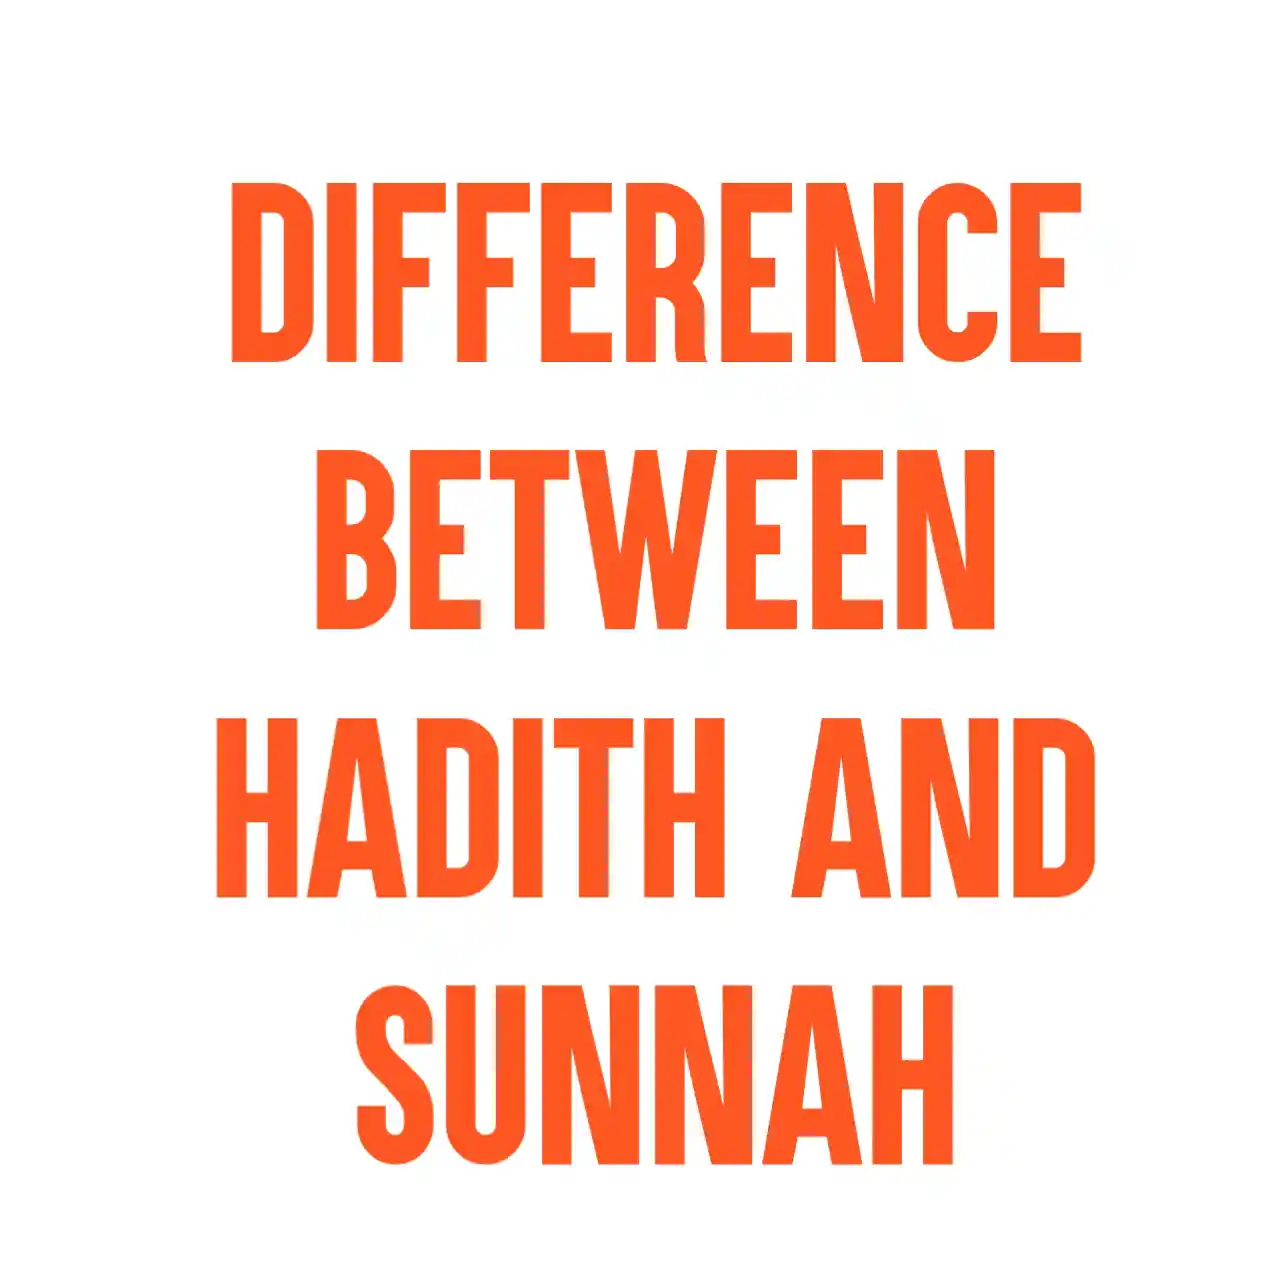 difference between sunnah and hadith